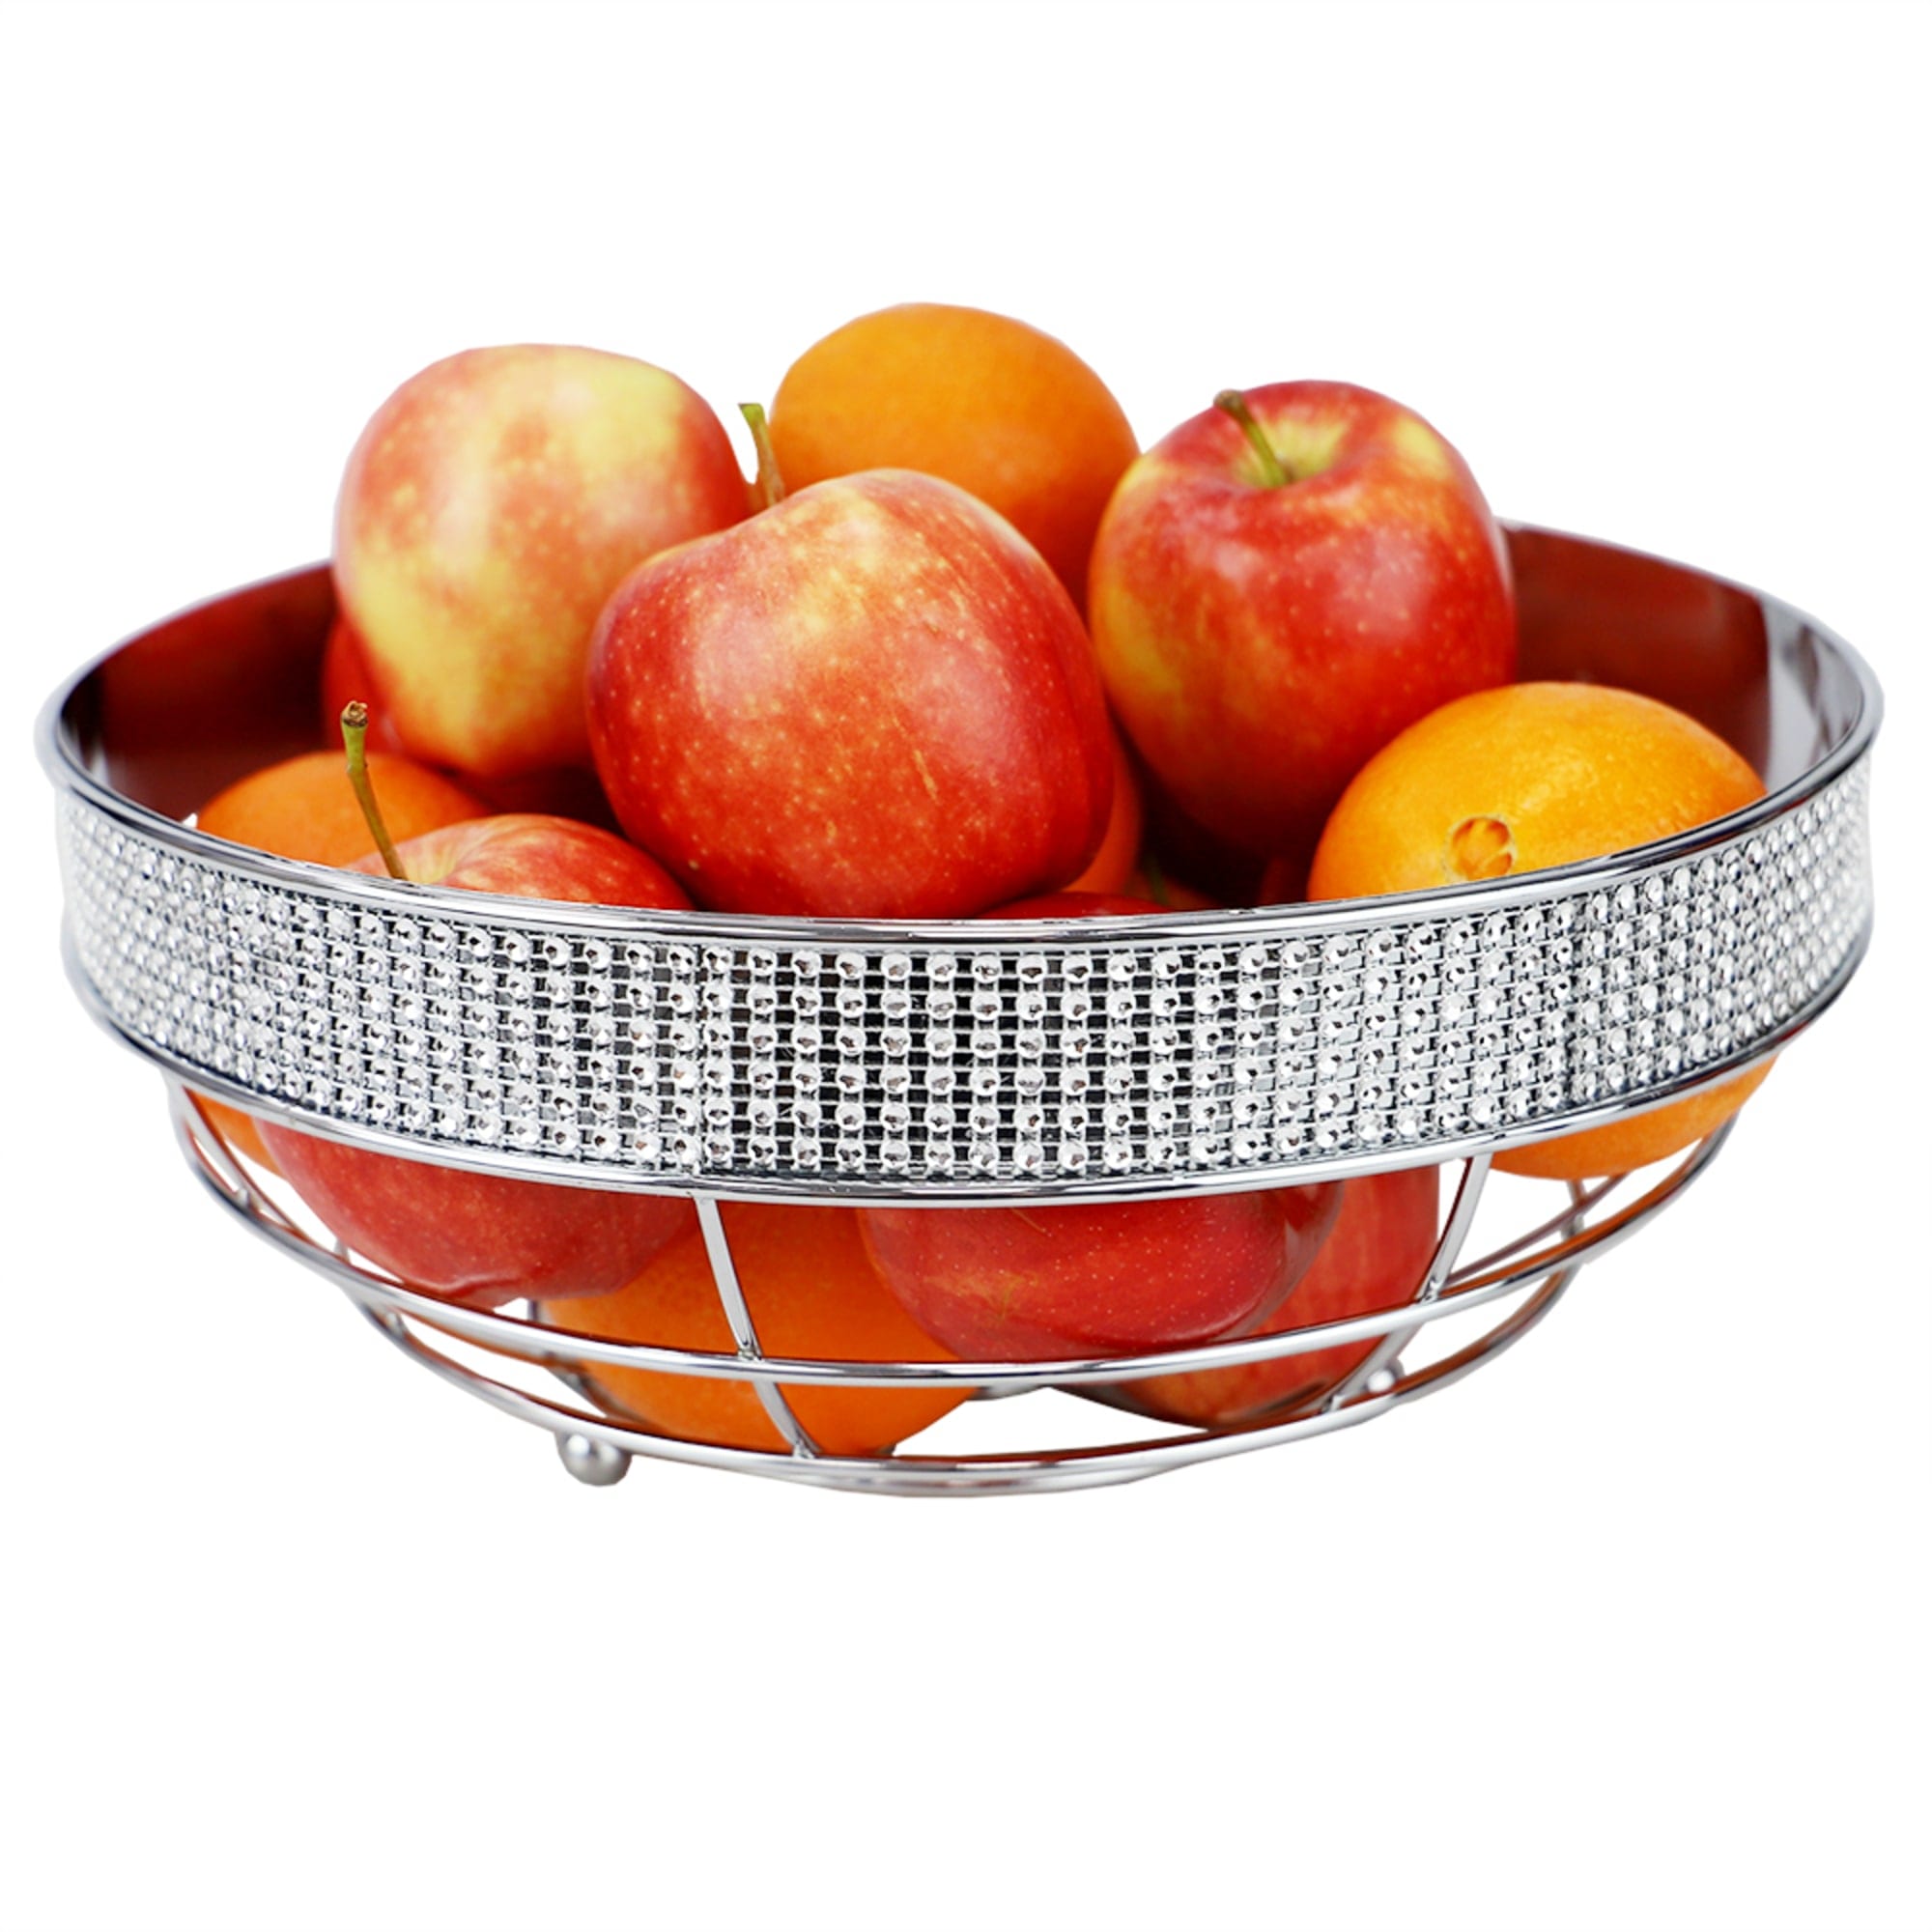 Home Basics Pave Large Capacity Decorative Non-Skid Steel Fruit Bowl, Chrome $7.00 EACH, CASE PACK OF 12